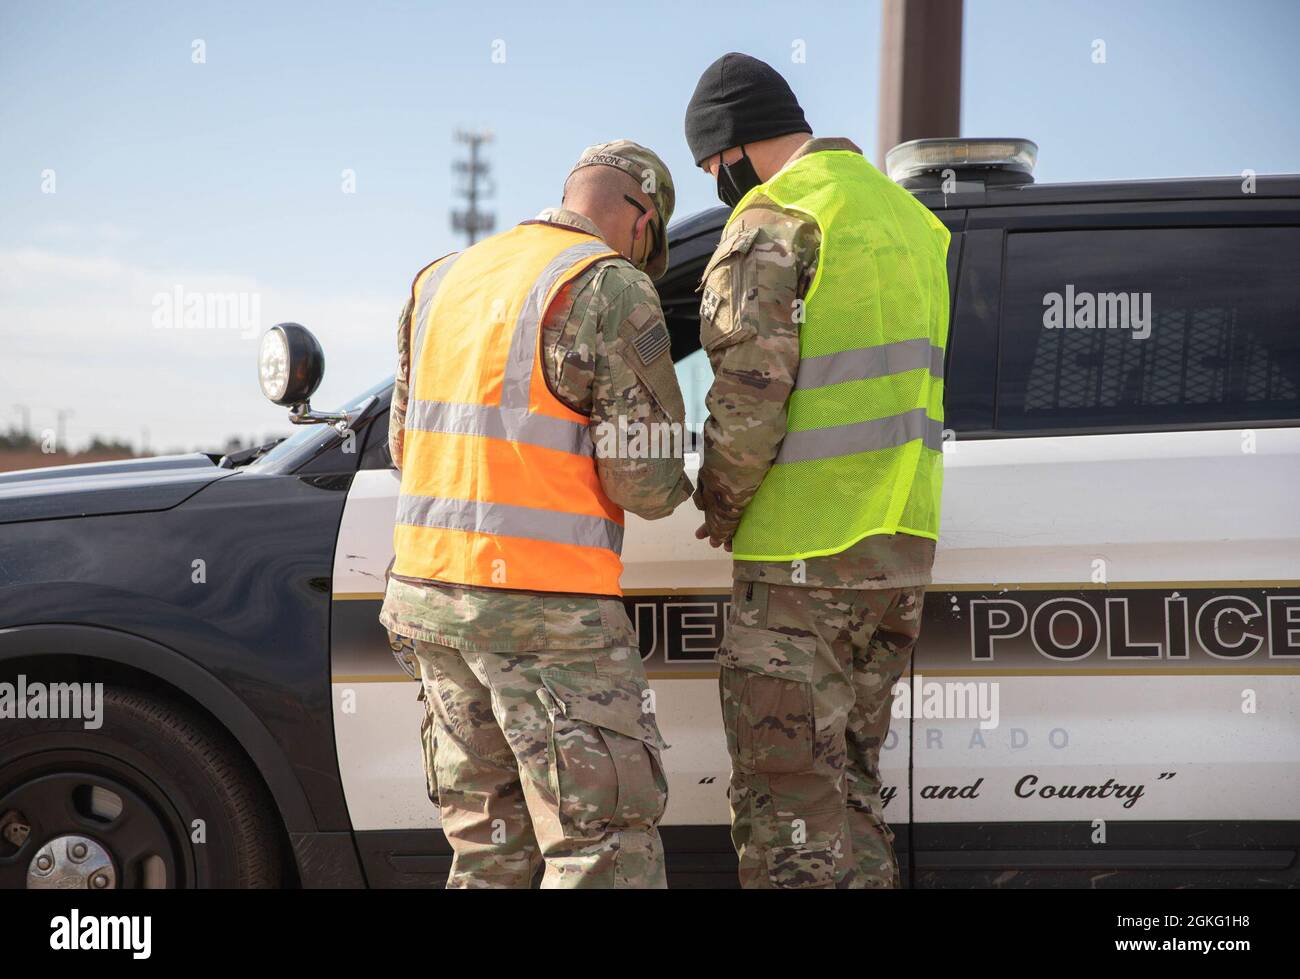 U.S. Army Staff Sgt. Joshua Waldron, left, and Cpl. Elijah Miles, right, cavalry scouts assigned to 3rd Squadron, 61st Cavalry Regiment, screen a Pueblo police officer prior to receiving a vaccination at the Pueblo Community Vaccination Center at the Colorado State Fairgrounds in Pueblo, Colorado, April 14, 2021. The Soldiers deployed from Fort Carson, Colorado to administer vaccinations to members of the Pueblo community. U.S. Northern Command, through U.S. Army North, remains committed to providing continued, flexible Department of Defense support to the Federal Emergency Management Agency a Stock Photo